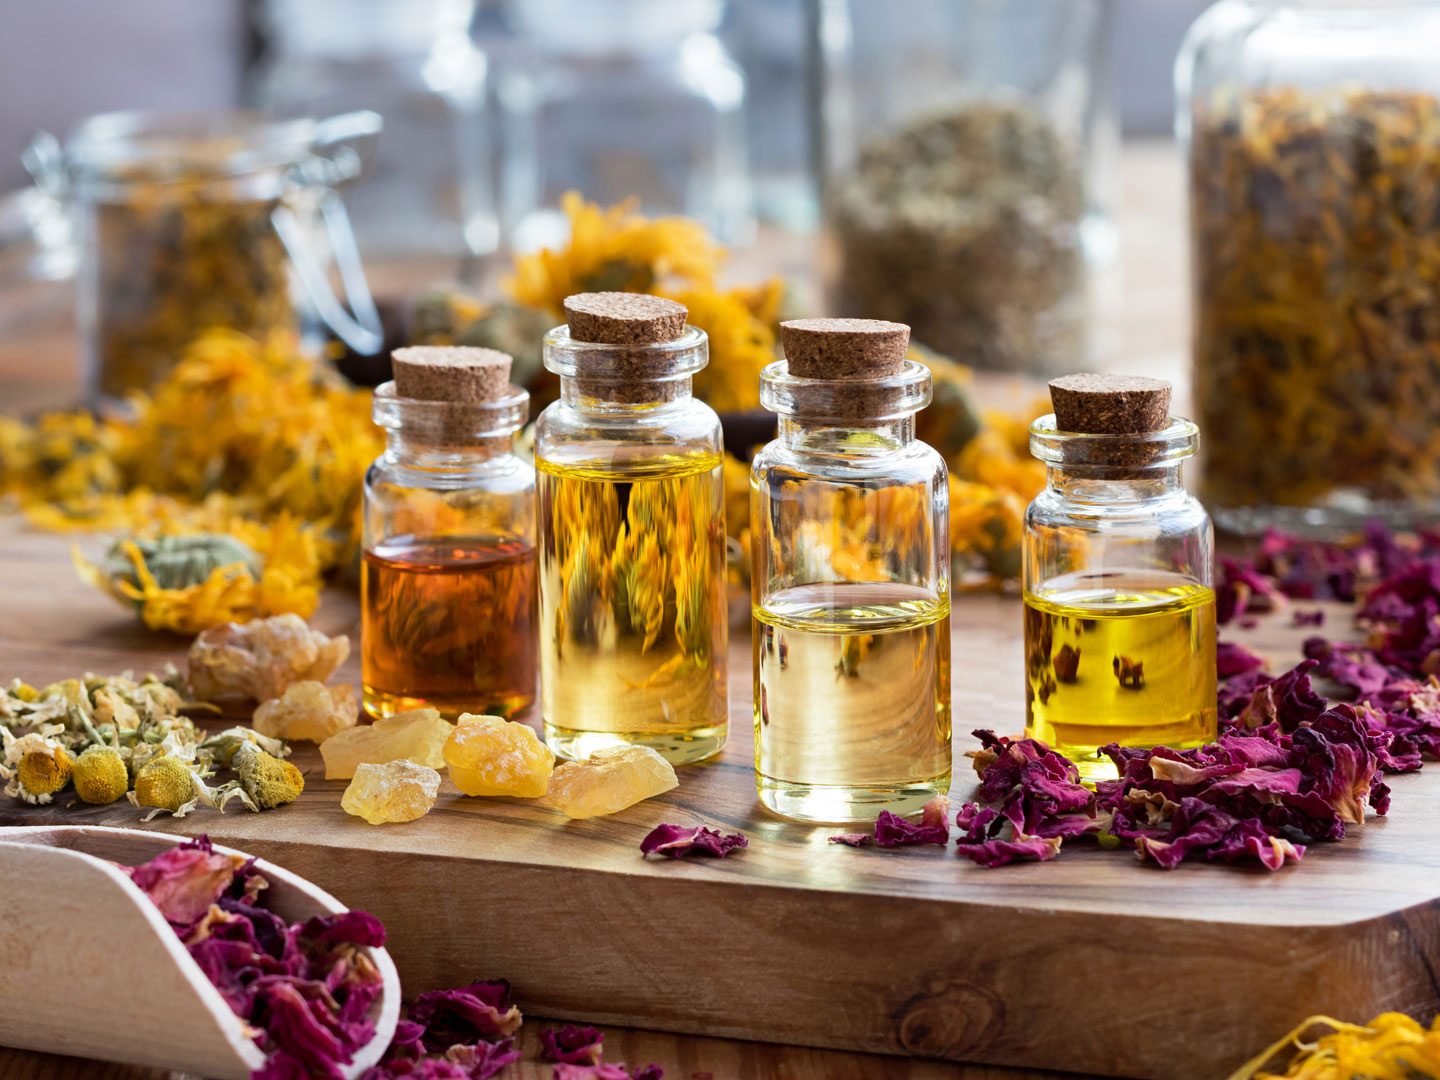 Dr. Weil’s Guide To Essential Oils | Andrew Weil, M.D.